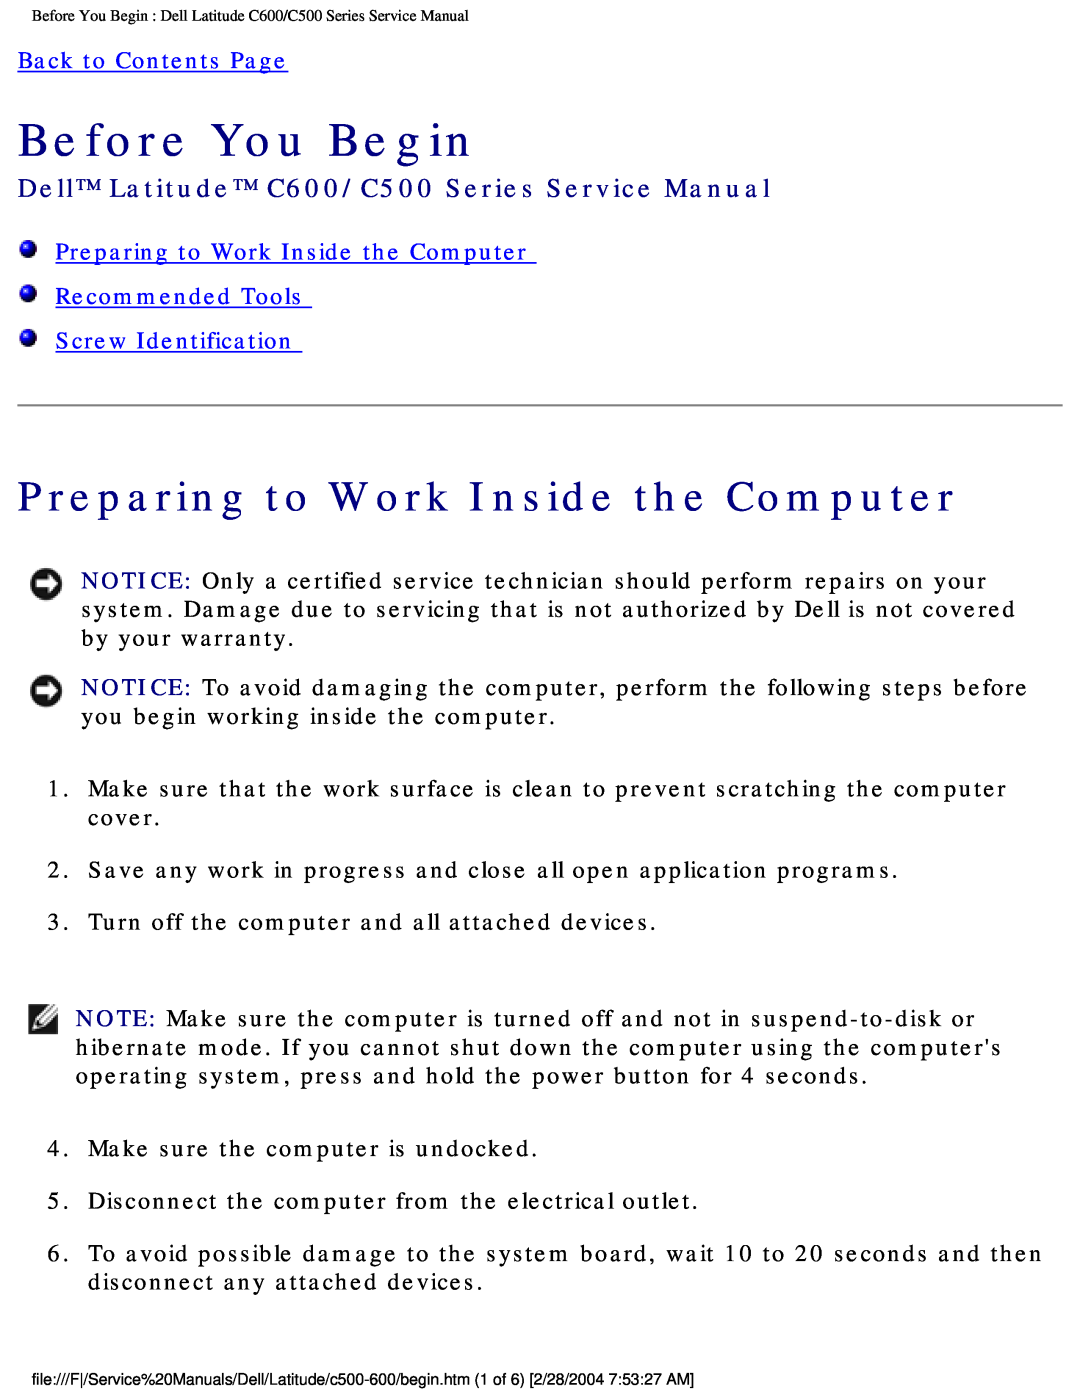 Dell manual Before You Begin, Preparing to Work Inside the Computer, Dell Latitude C600/C500 Series Service Manual 